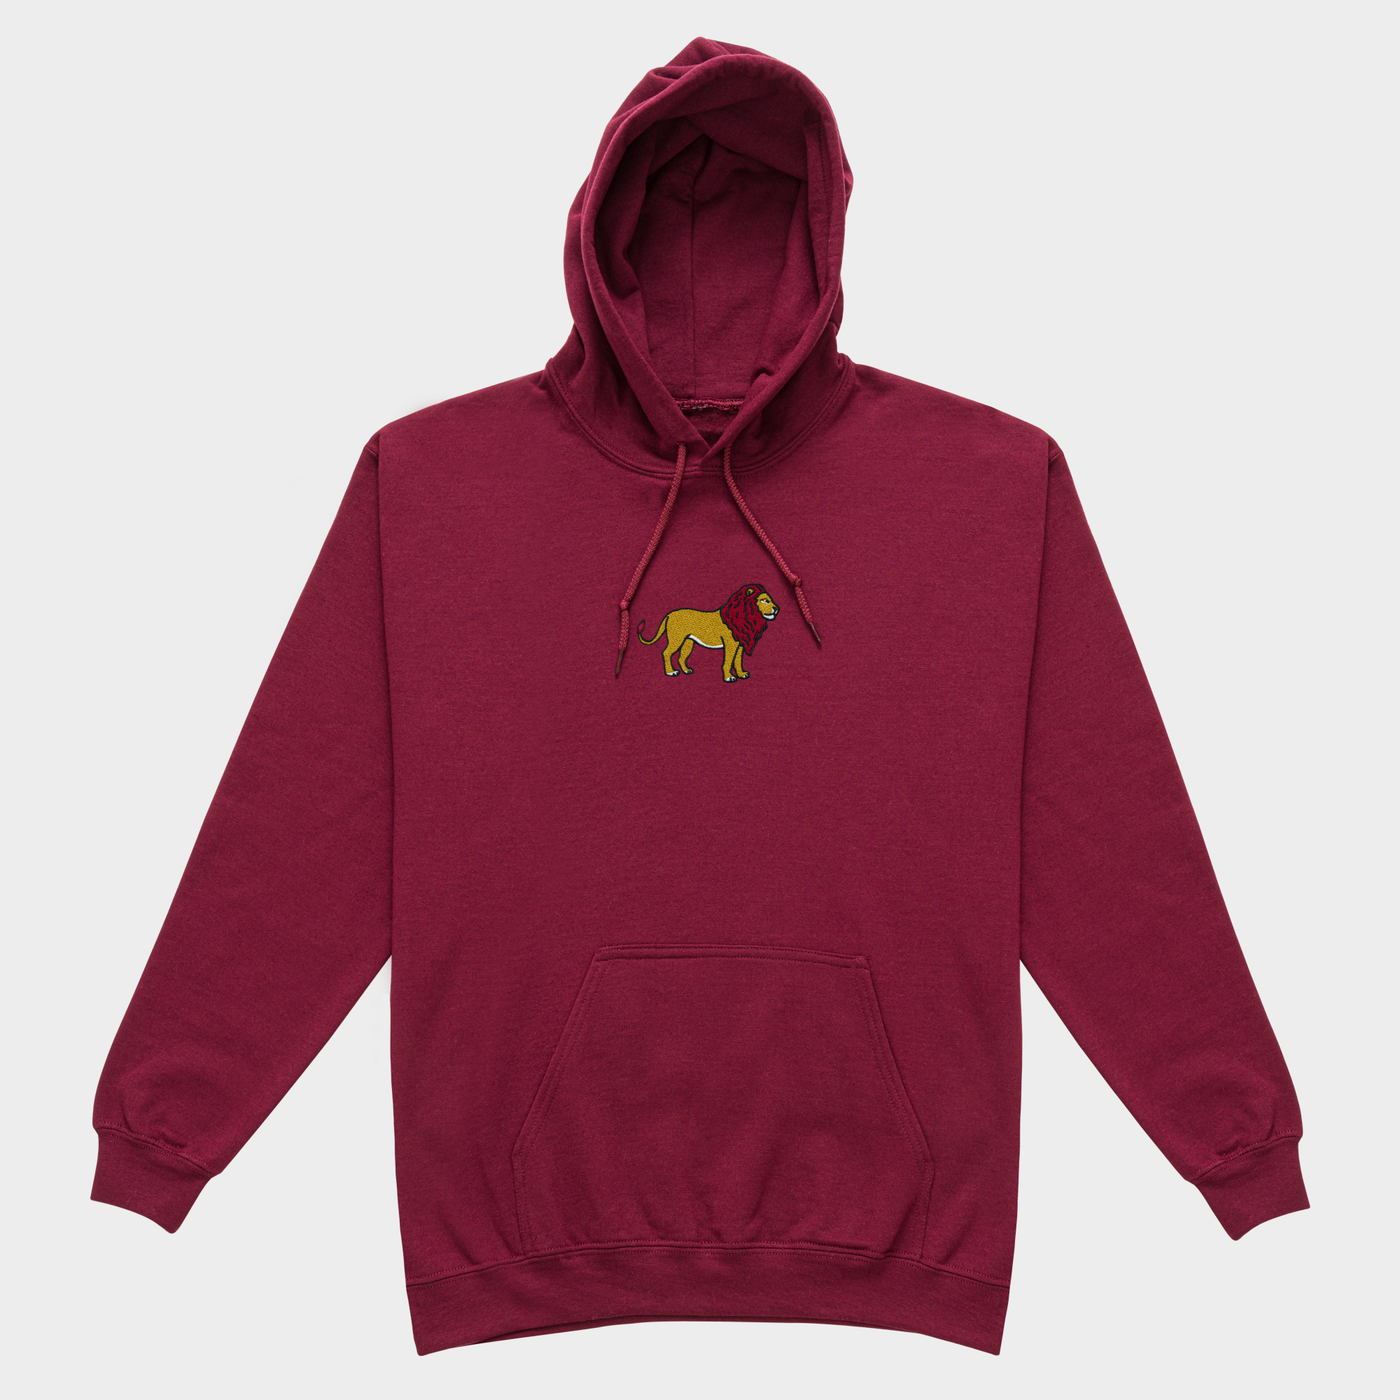 Bobby's Planet Women's Embroidered Lion Hoodie from African Animals Collection in Maroon Color#color_maroon